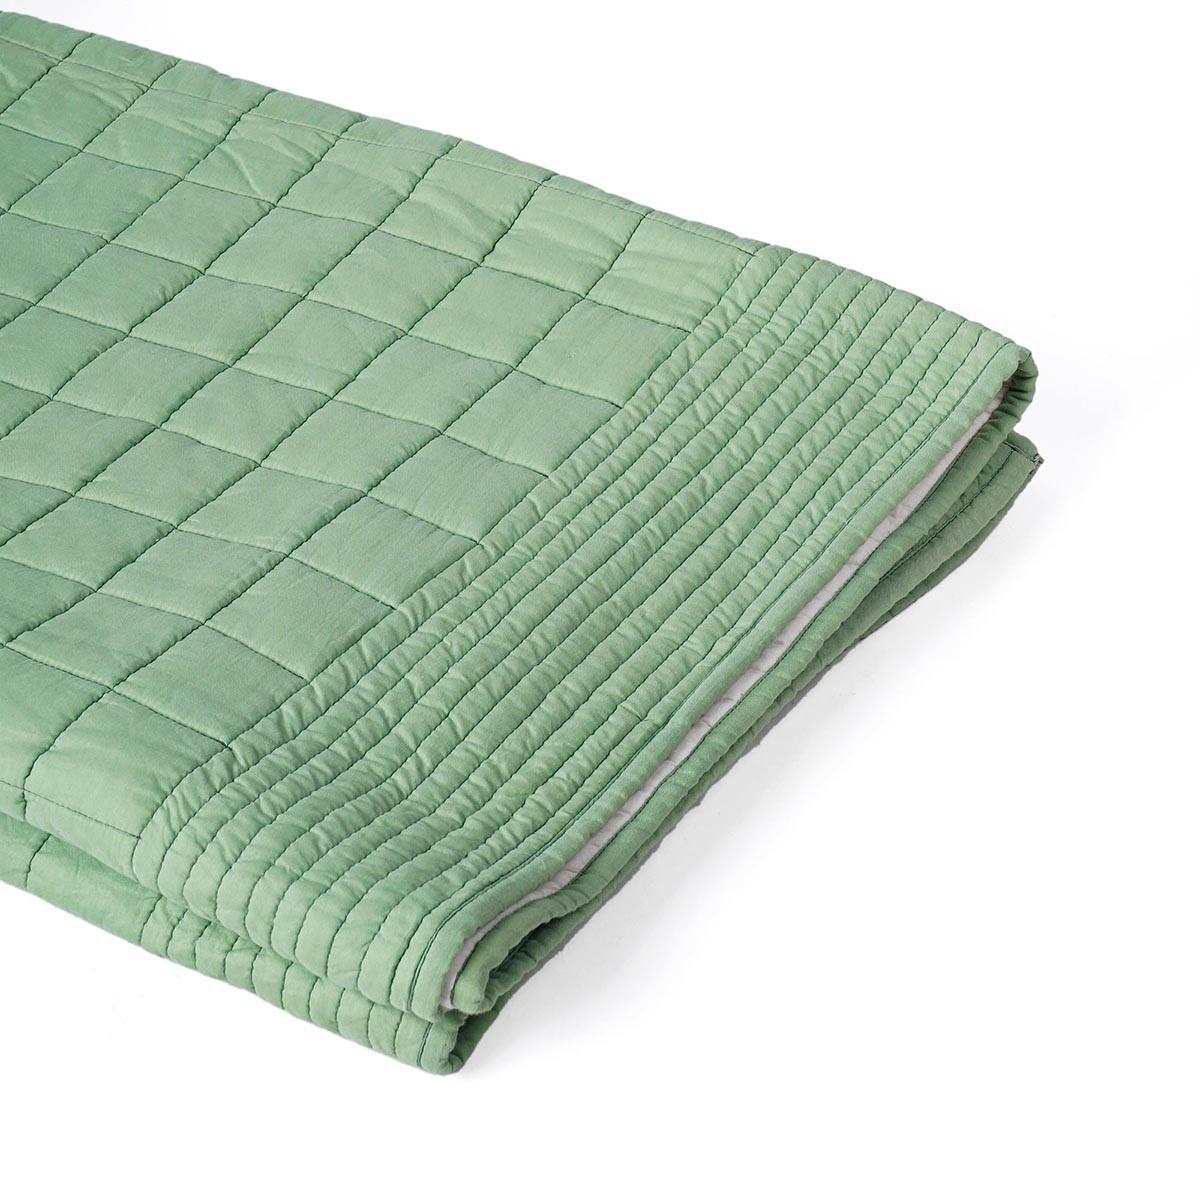 Sage Green colour machine quilted Throw blanket, 100% cotton, 50X60 inches